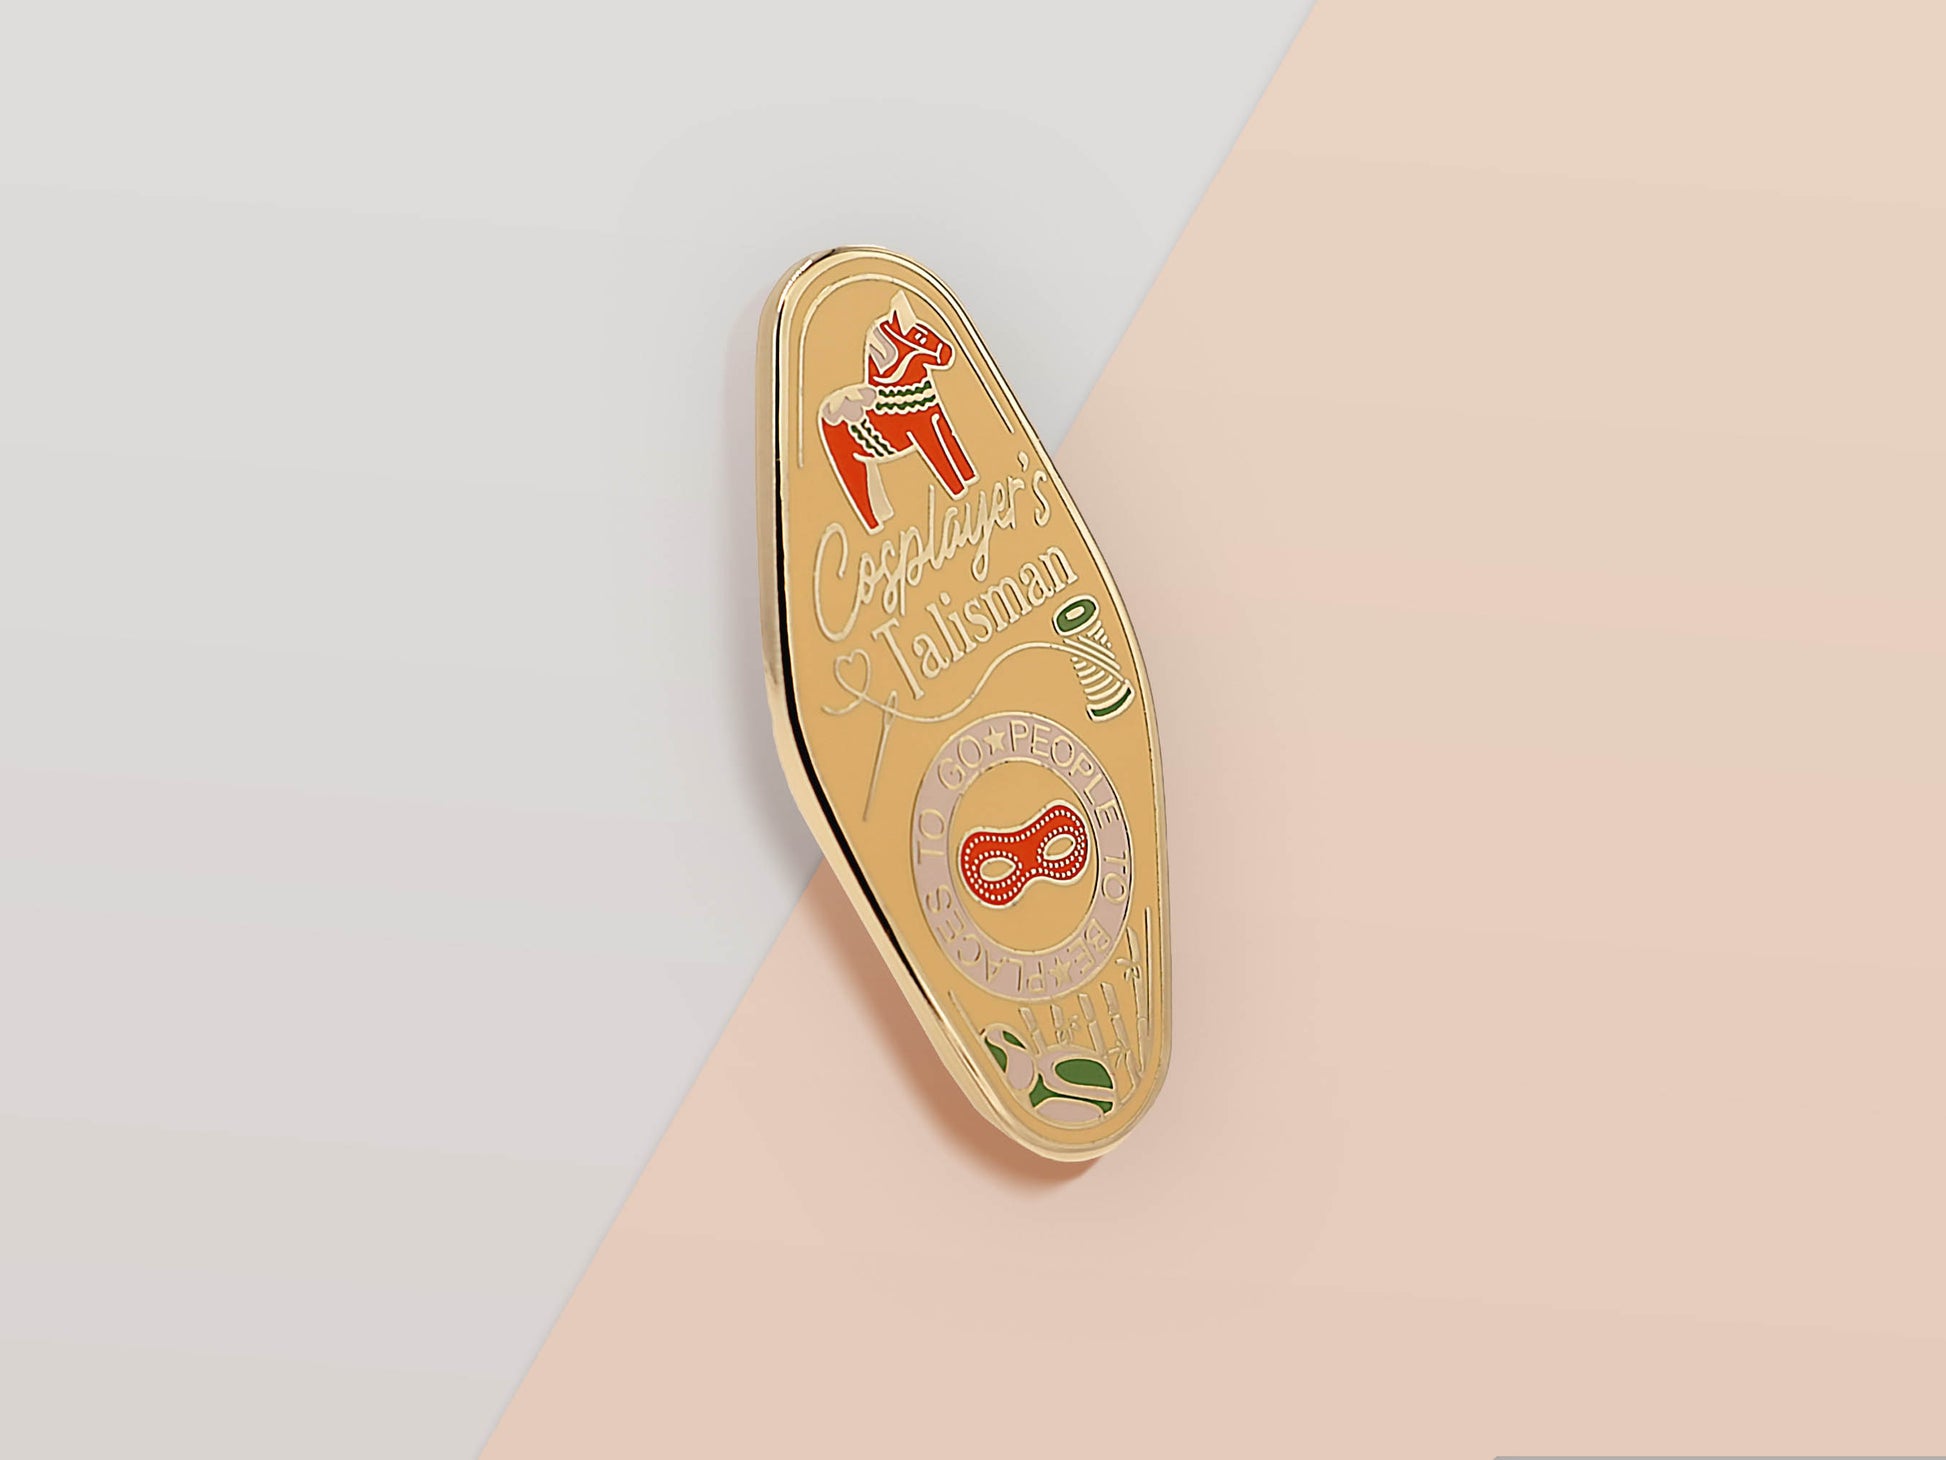 Gold Enamel Talisman Pin with yellow and red design and the words Cosplayer's Talisman, Places To Go People To Be. The pins design includes a mask and needle and thread, a wooden horse, as well as plants and crystals.